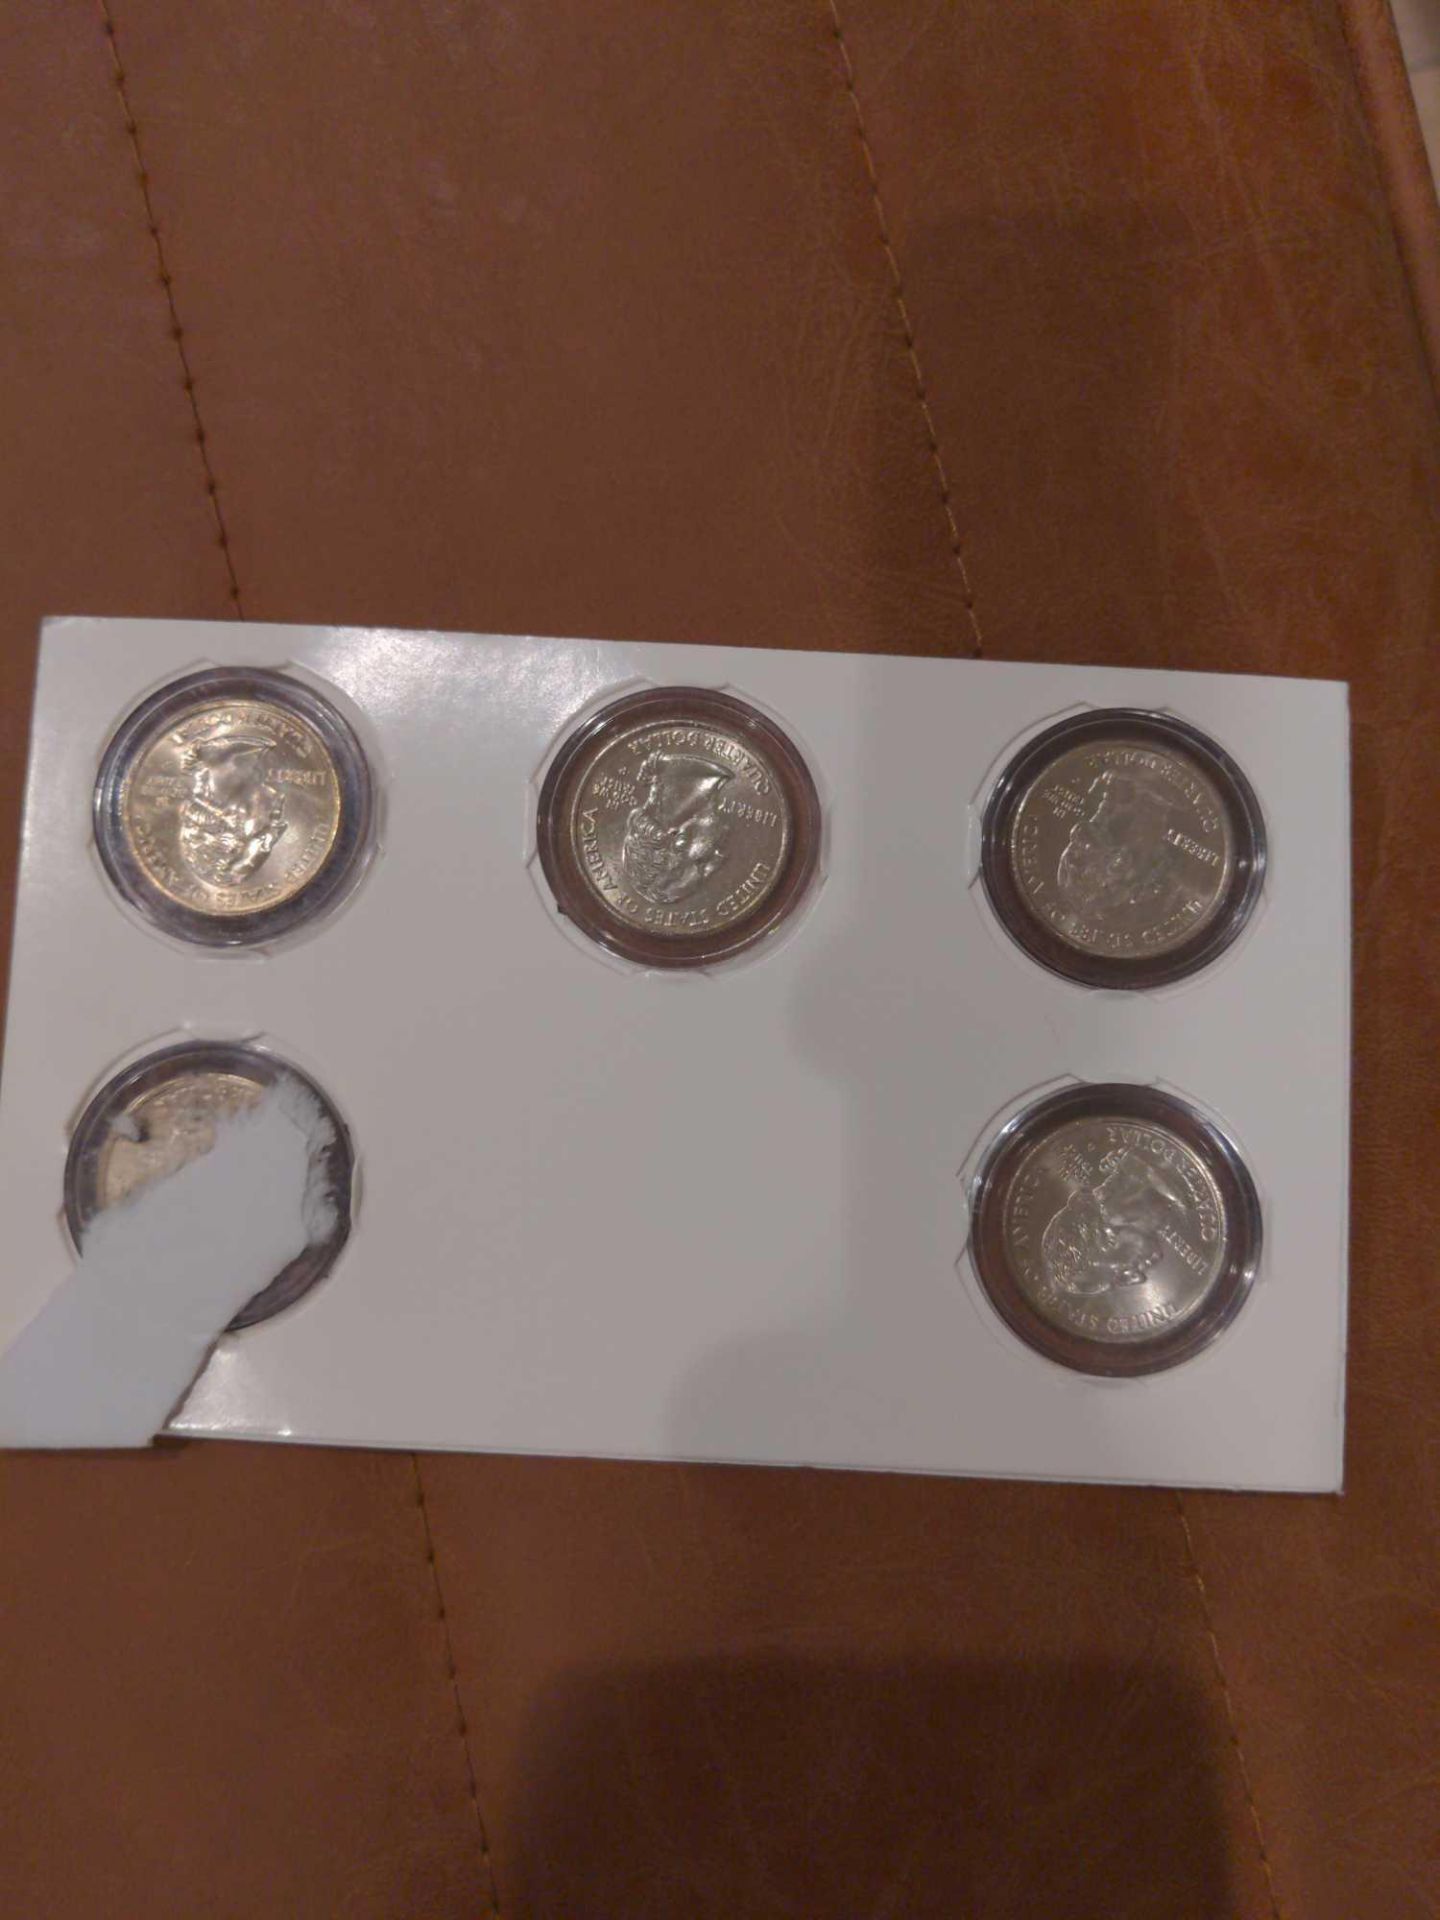 5 Commerative Sets of Quarters - Image 3 of 6